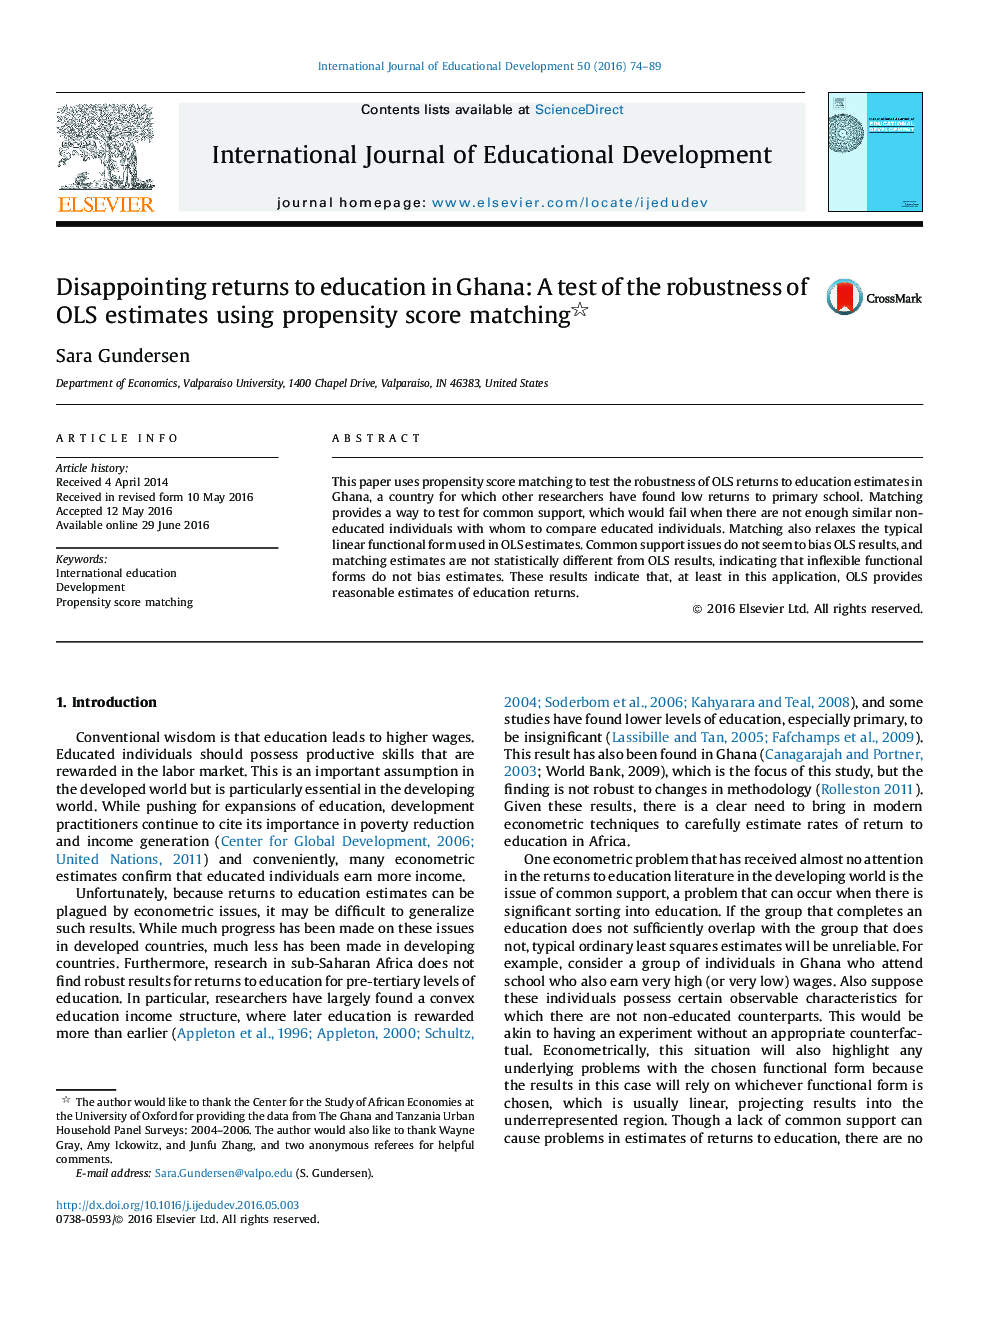 Disappointing returns to education in Ghana: A test of the robustness of OLS estimates using propensity score matching